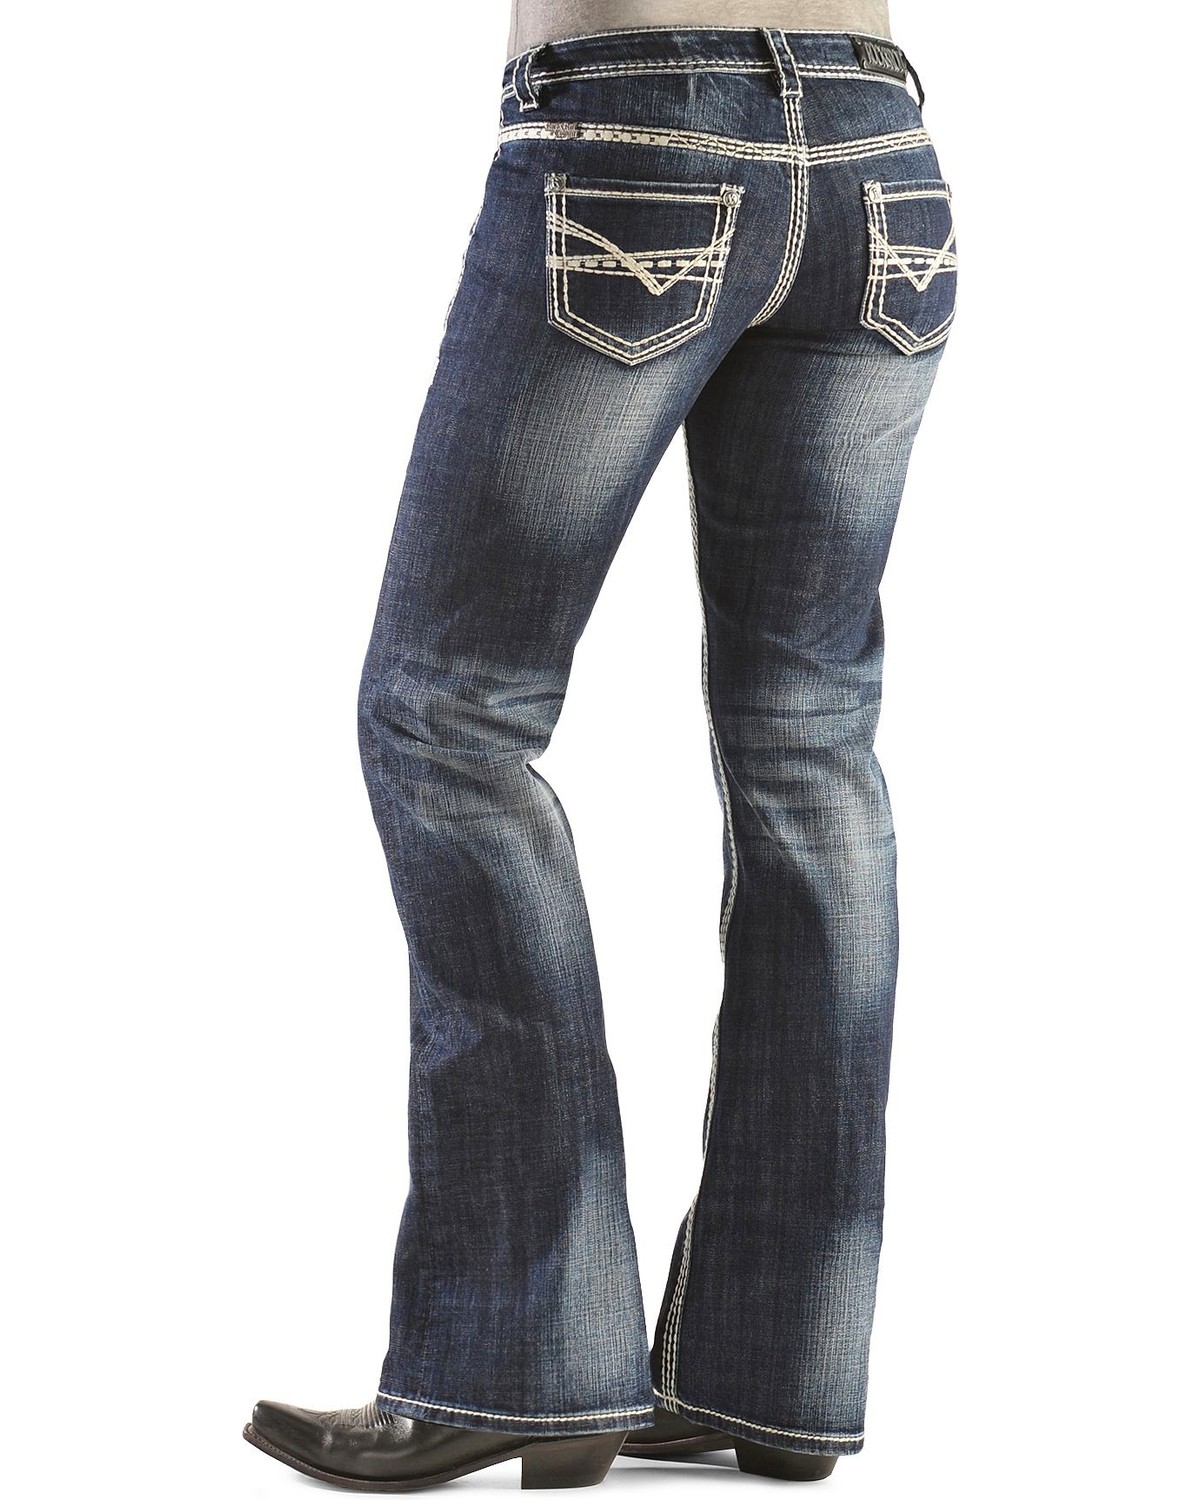 rock and roll women's jeans